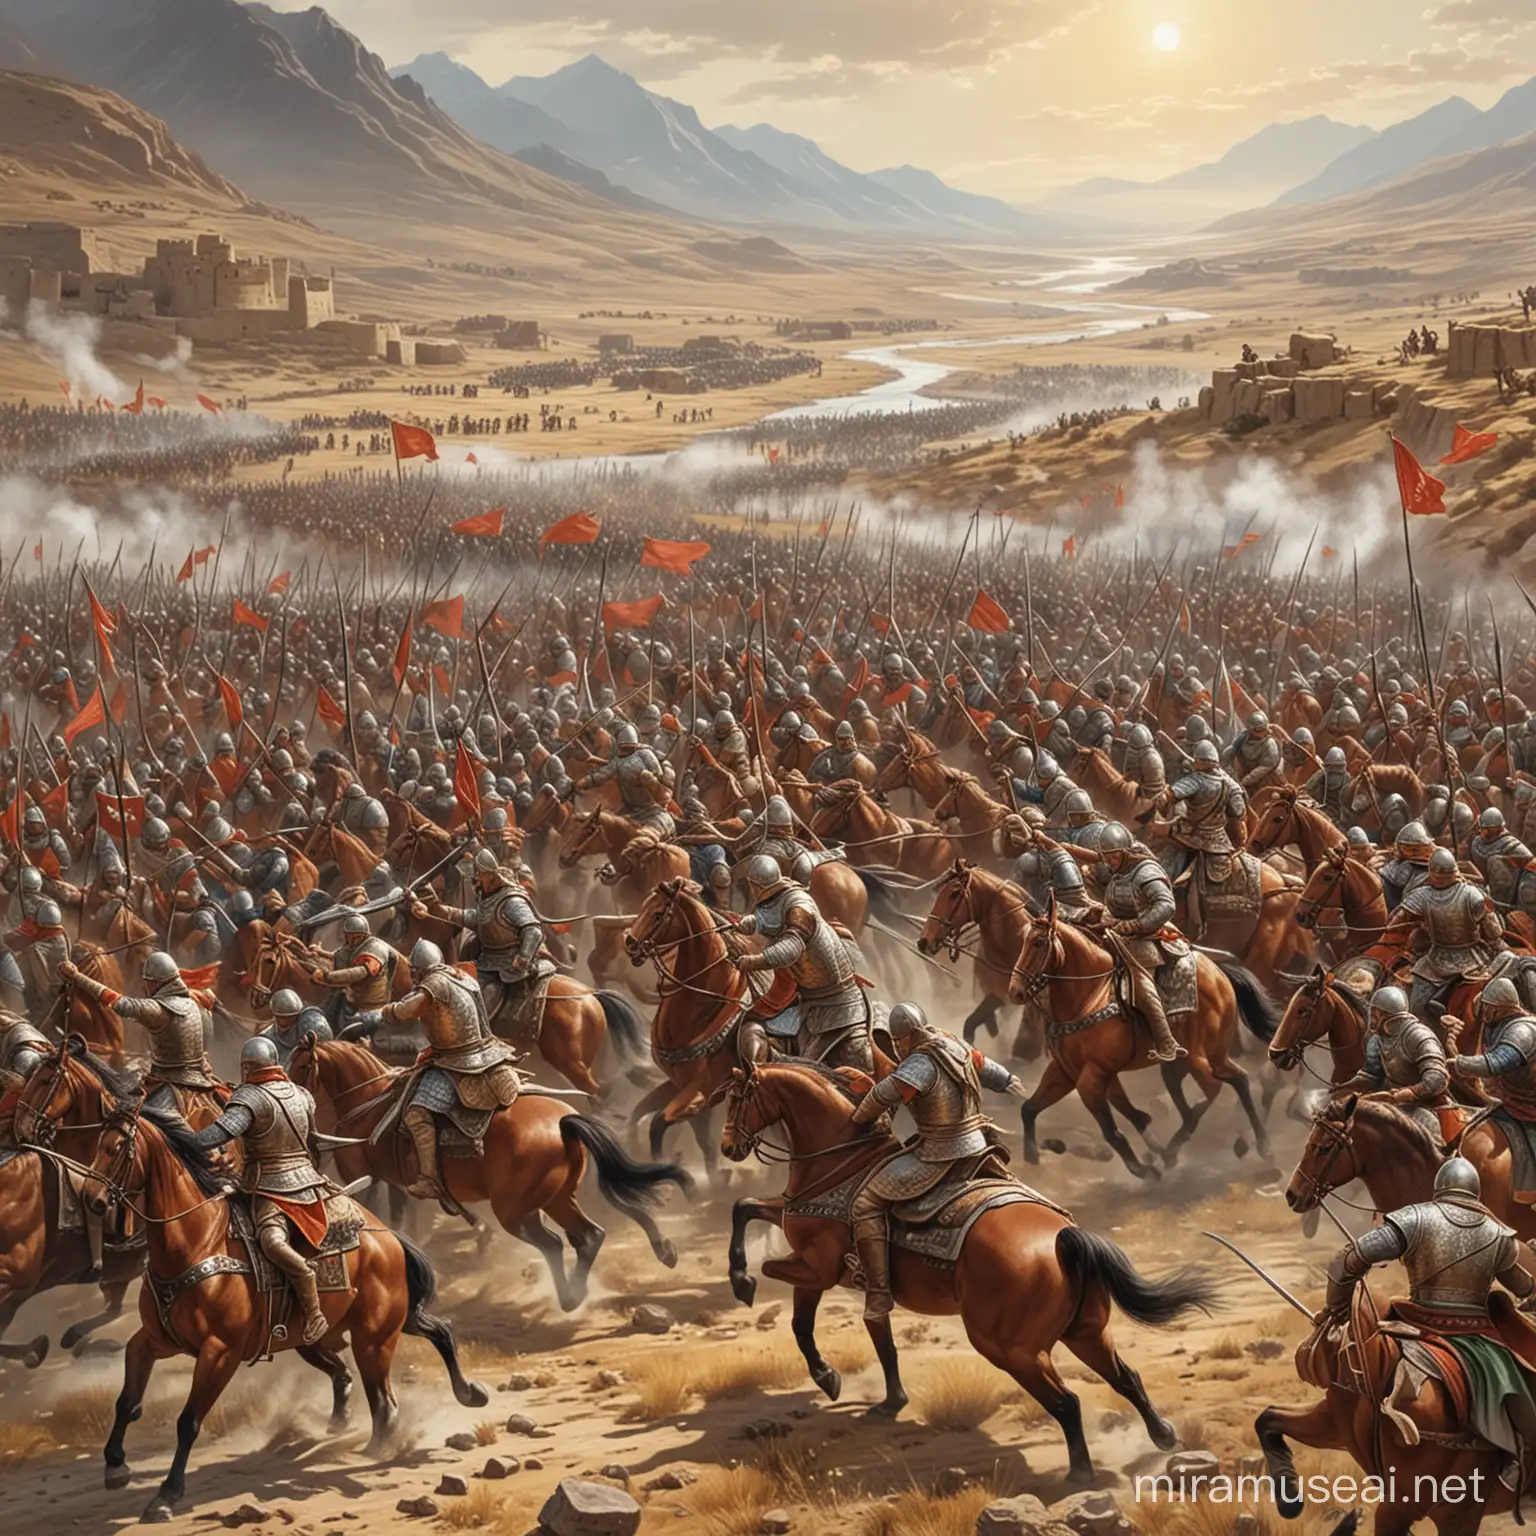 Epic Illustration of the Historic Battle of Talas Conquest and Conflict